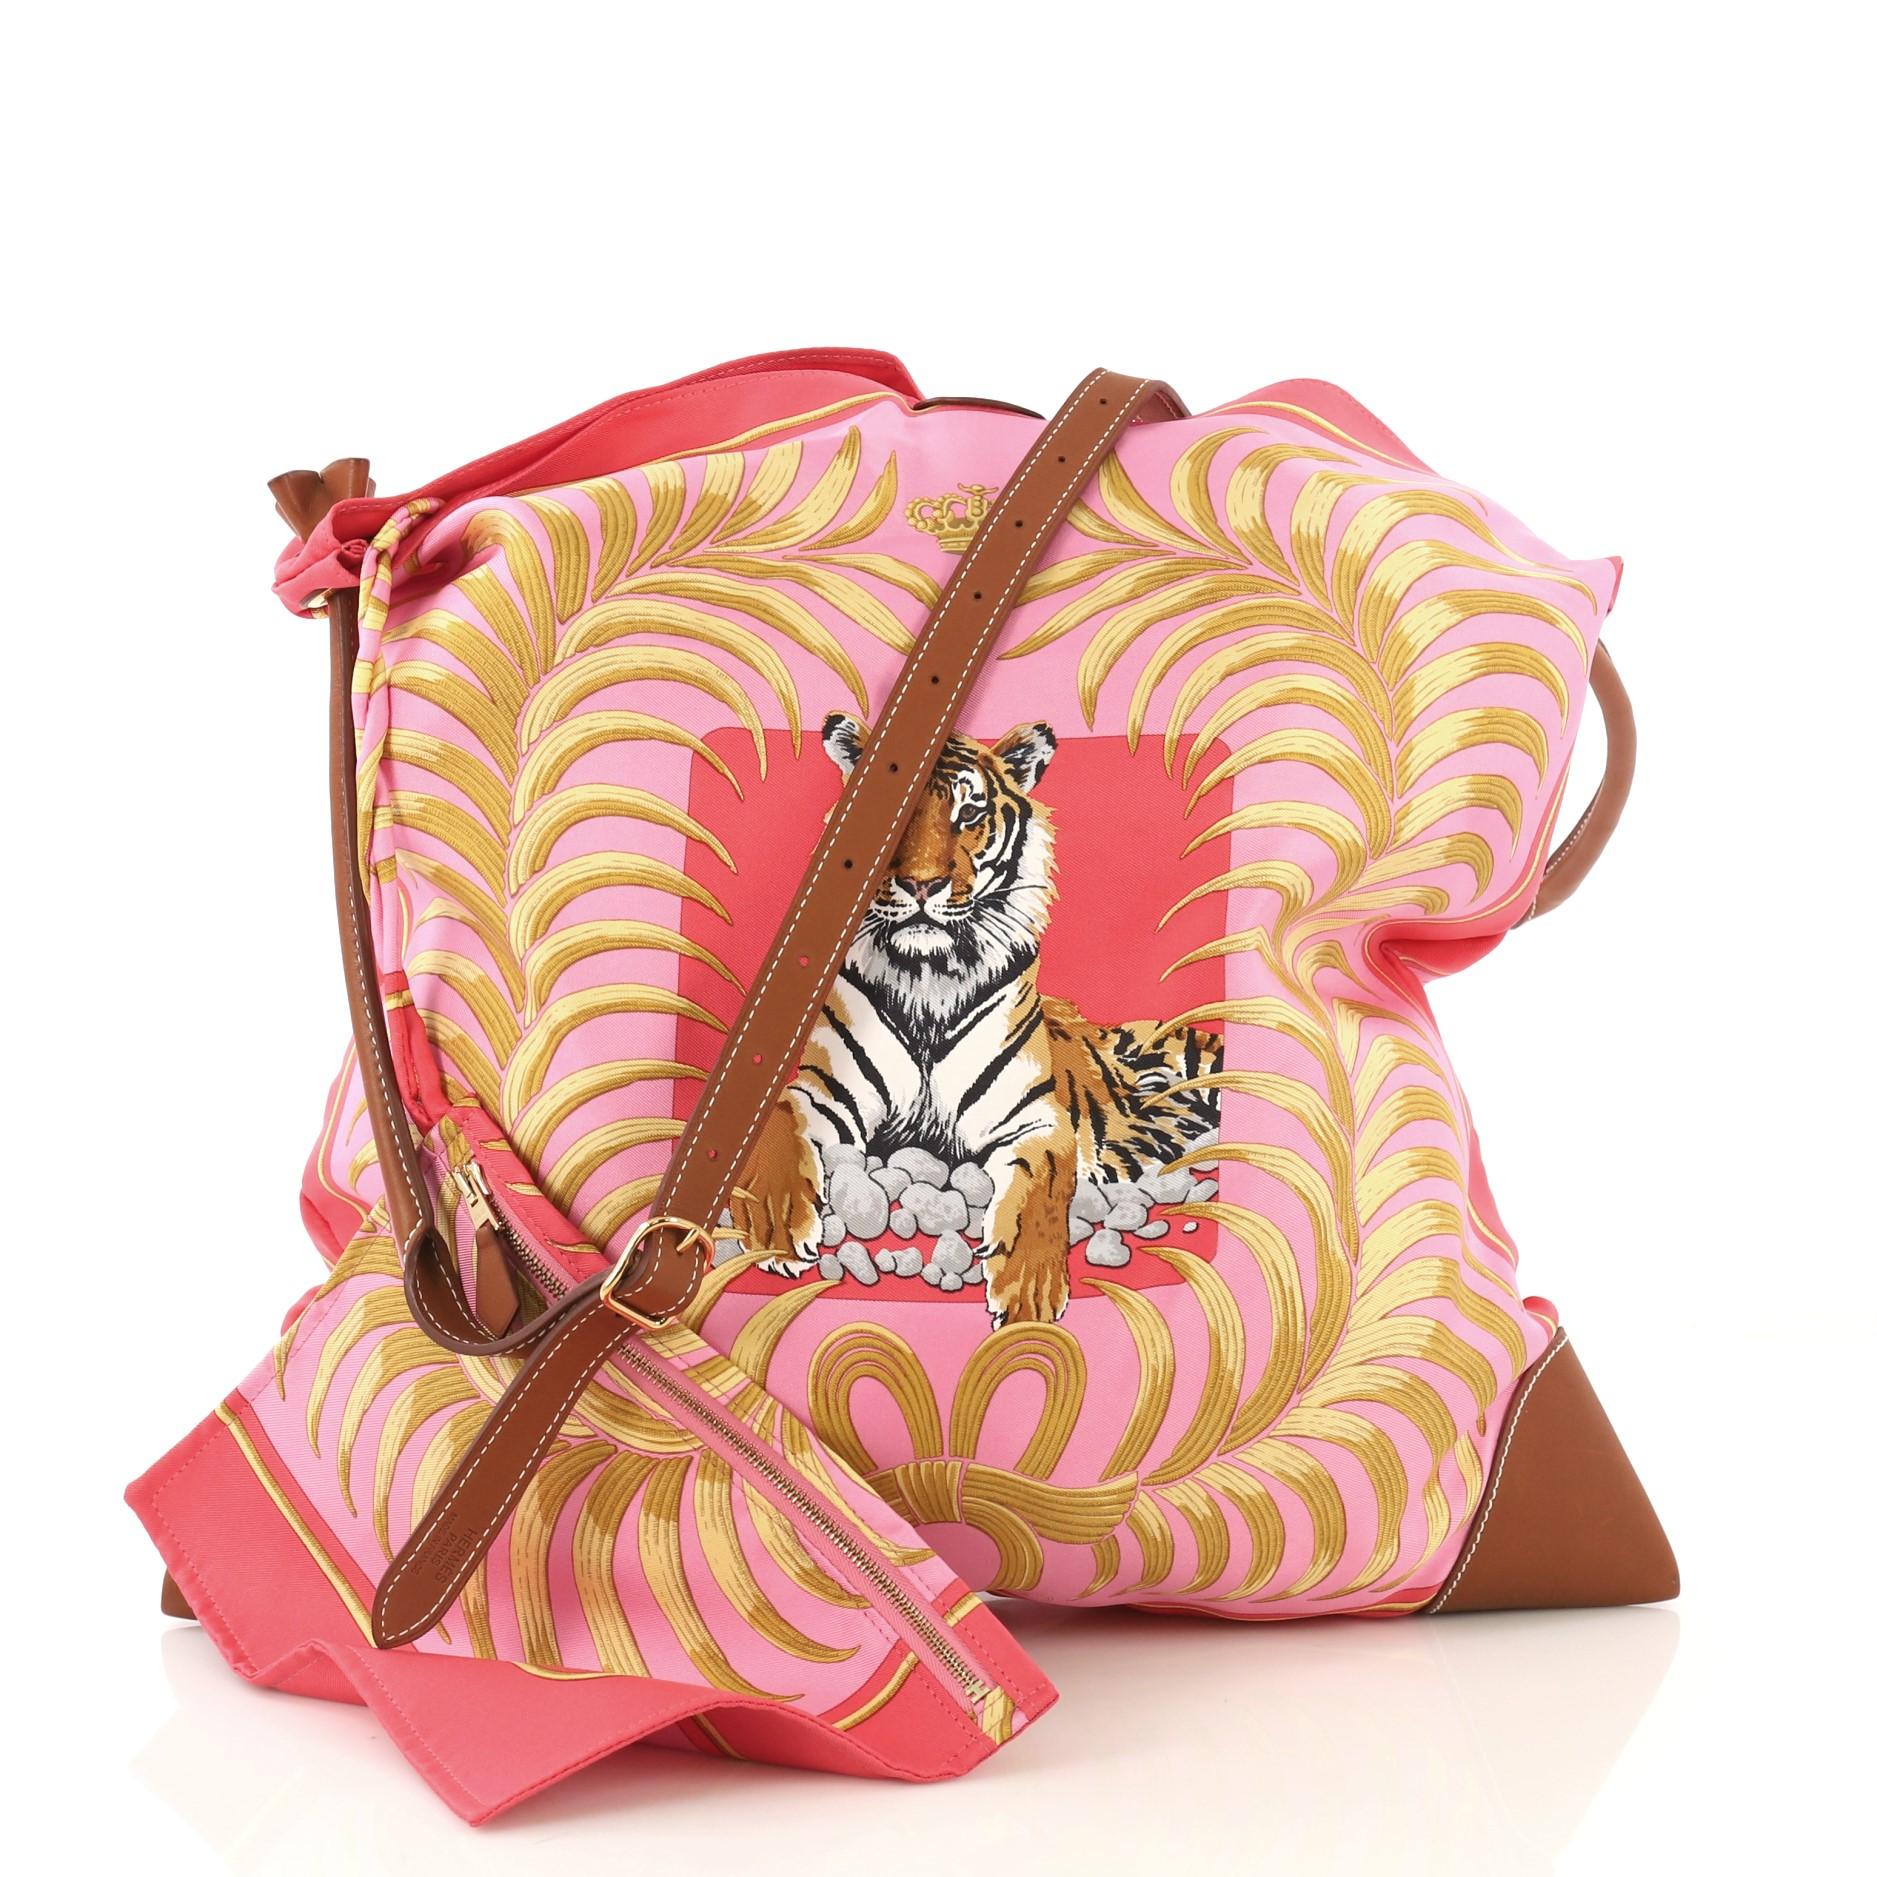 This Hermes Silky City Handbag Printed Silk and Leather GM, crafted in Fauve Barenia leather and Multicolor Silk, features an adjustable looping shoulder strap, Tigre Royal print, inside pouch, and gold hardware. It opens to a Pink Silk interior.